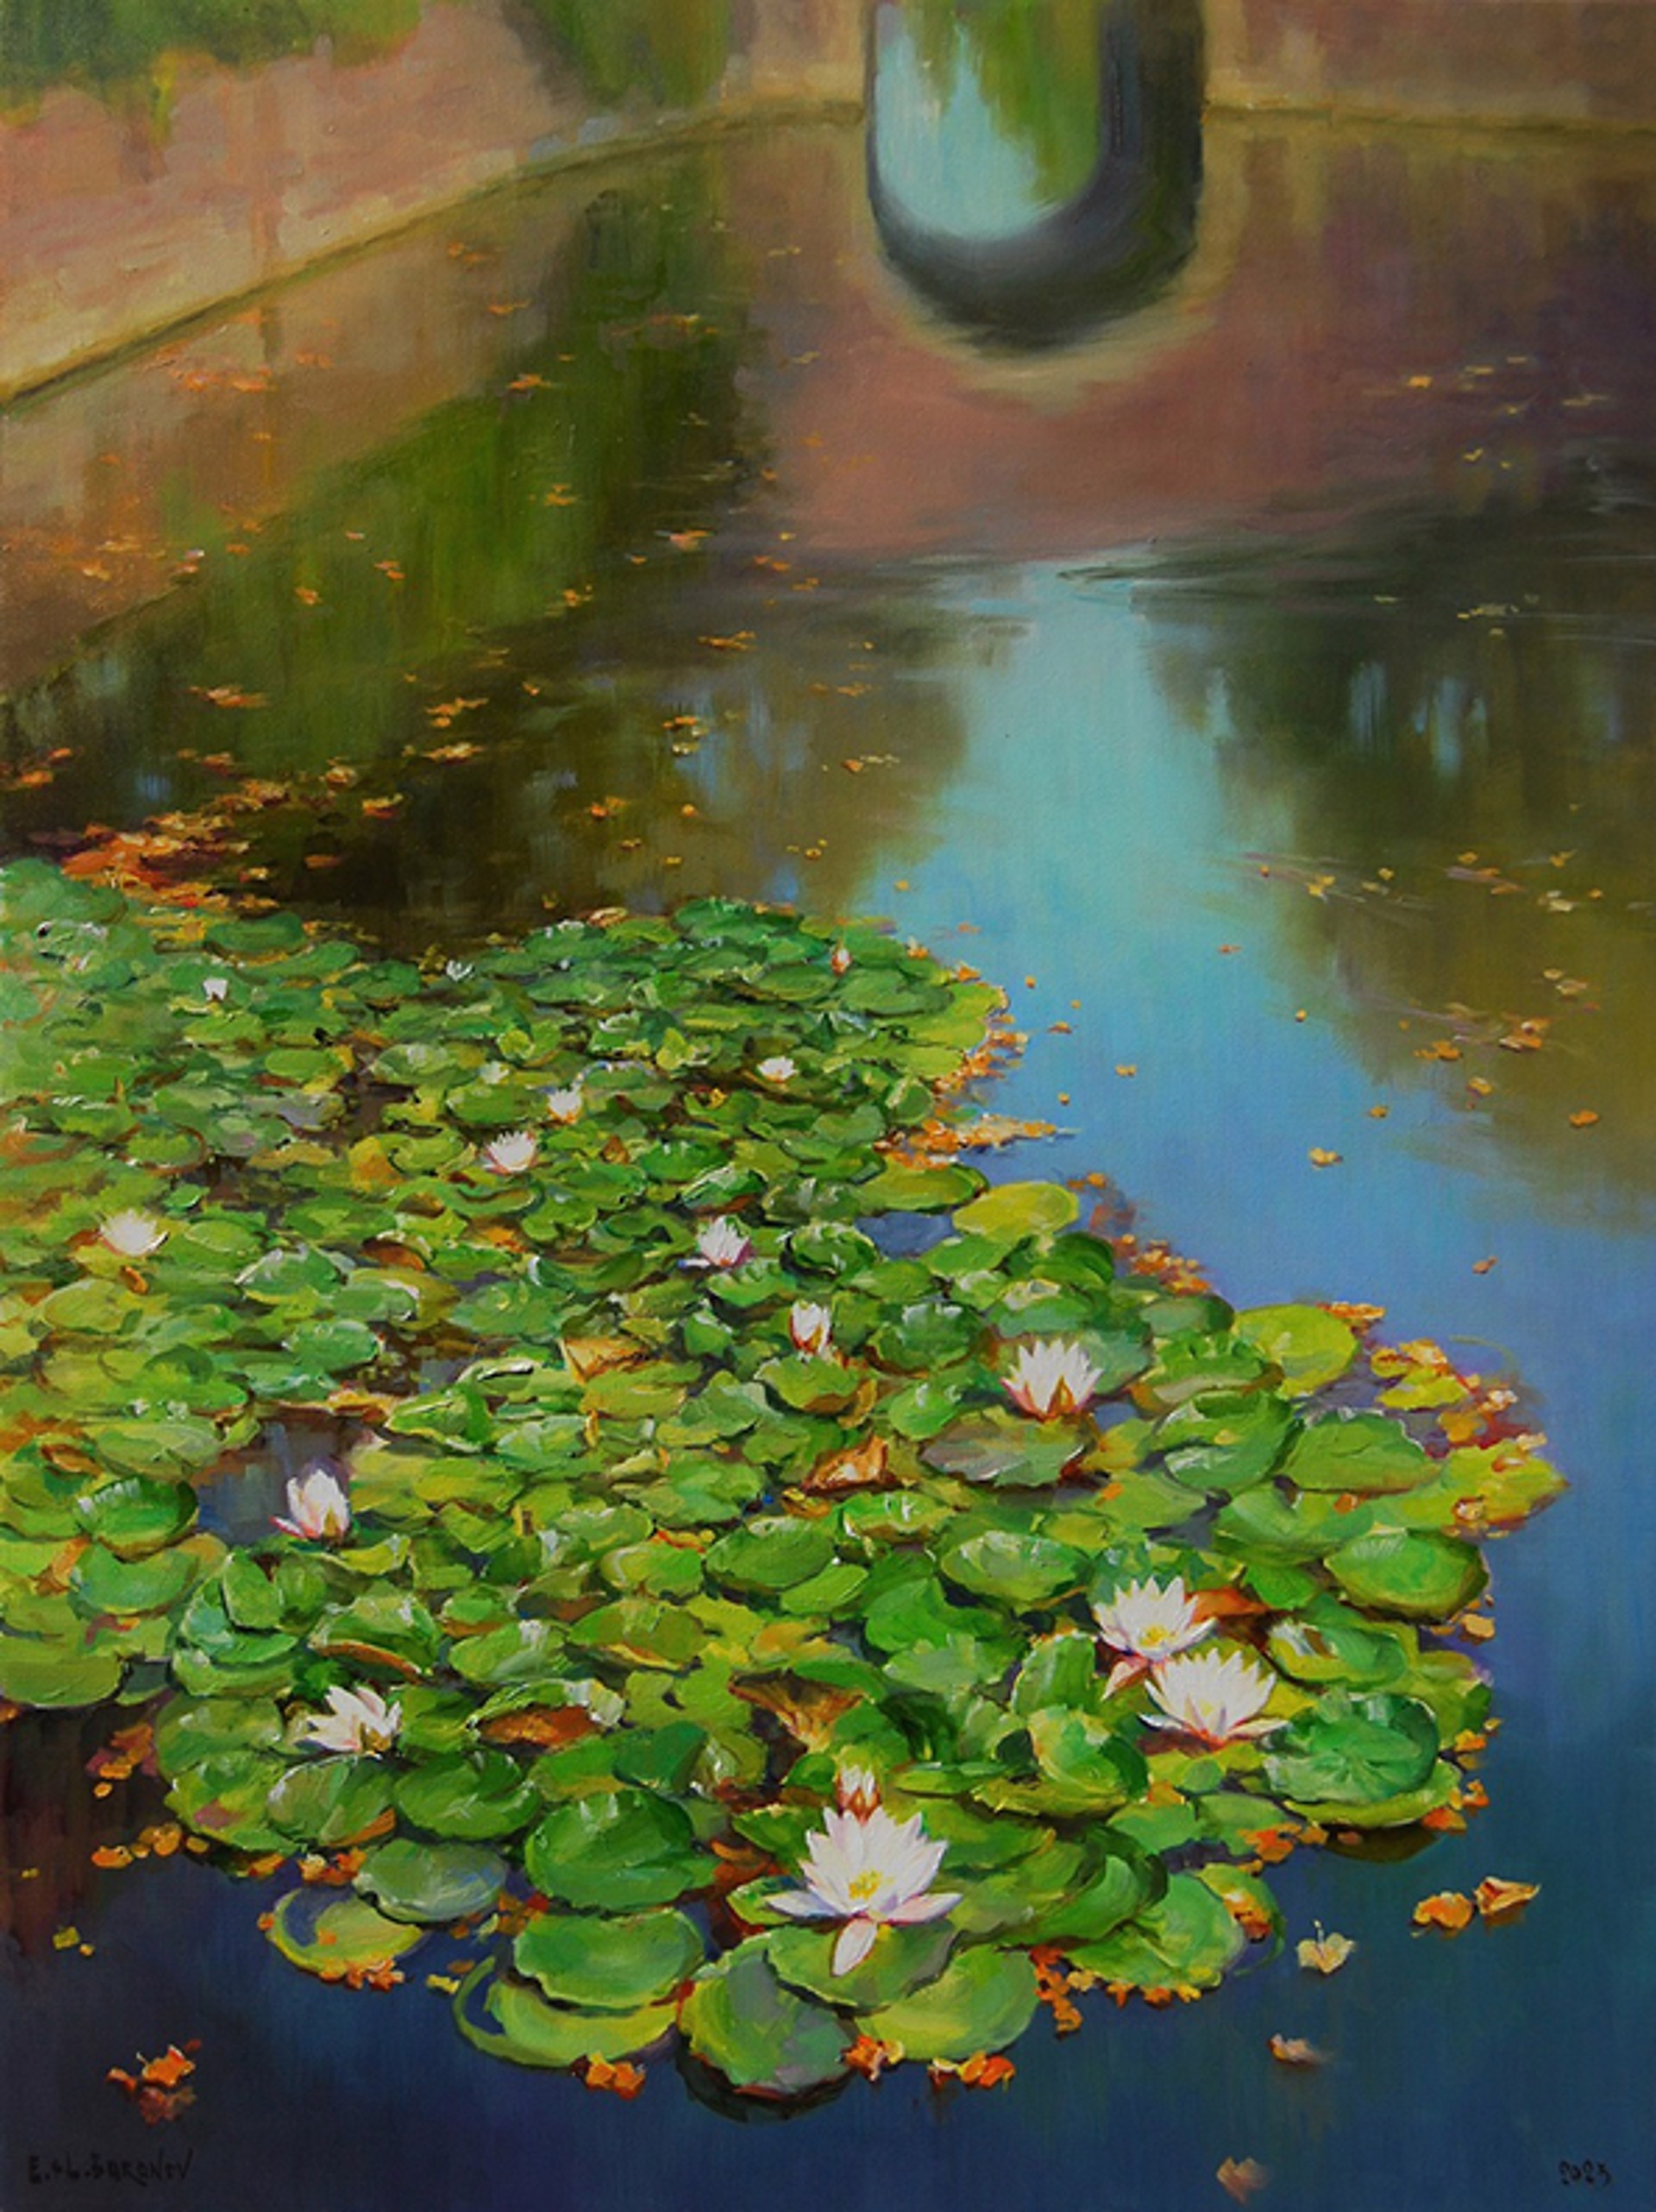 Water Lilies After Rain by Evgeny & Lydia Baranov